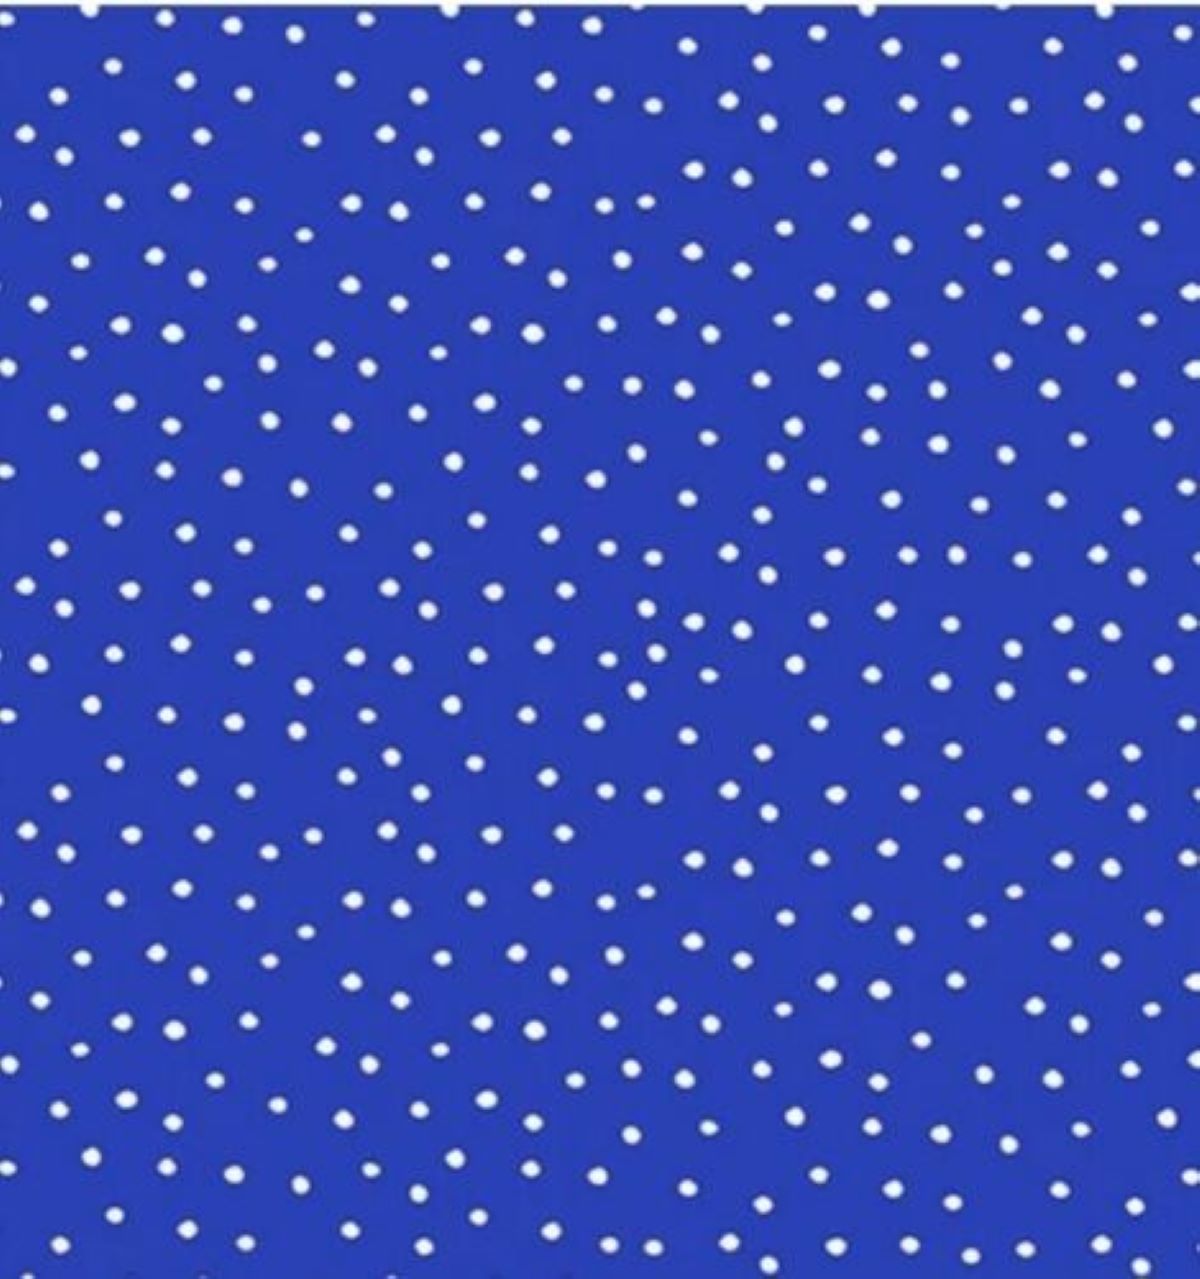 Dinky Dots Blue with White Dots Cotton Fabric by Loralie Designs